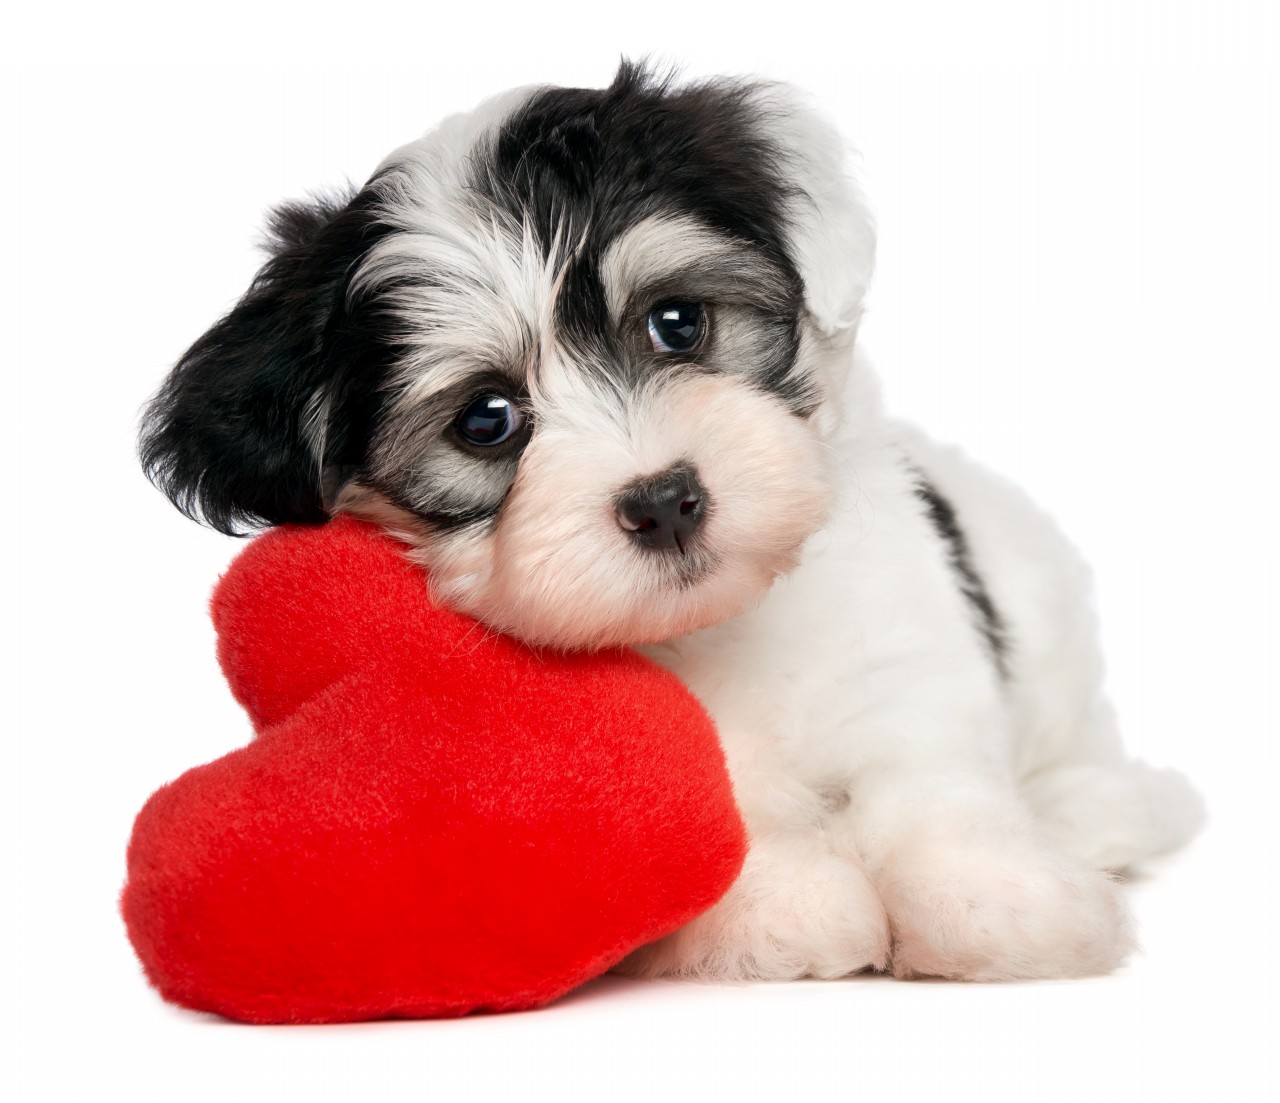 Dog With Big Heart Photo And Wallpaper Beautiful Havanese